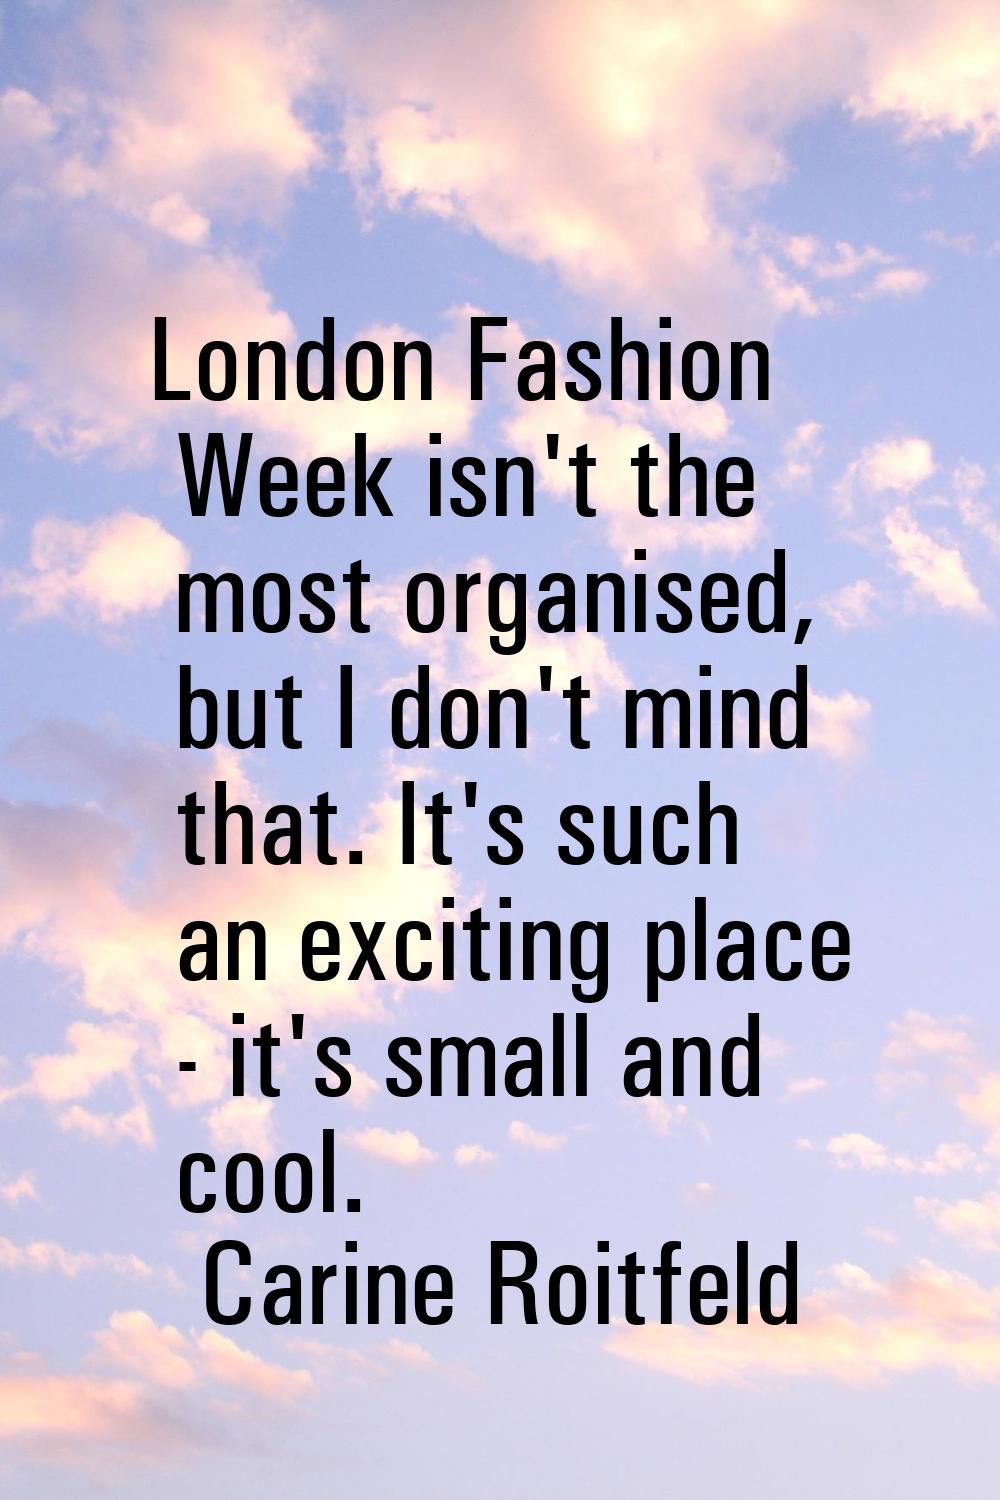 London Fashion Week isn't the most organised, but I don't mind that. It's such an exciting place - 